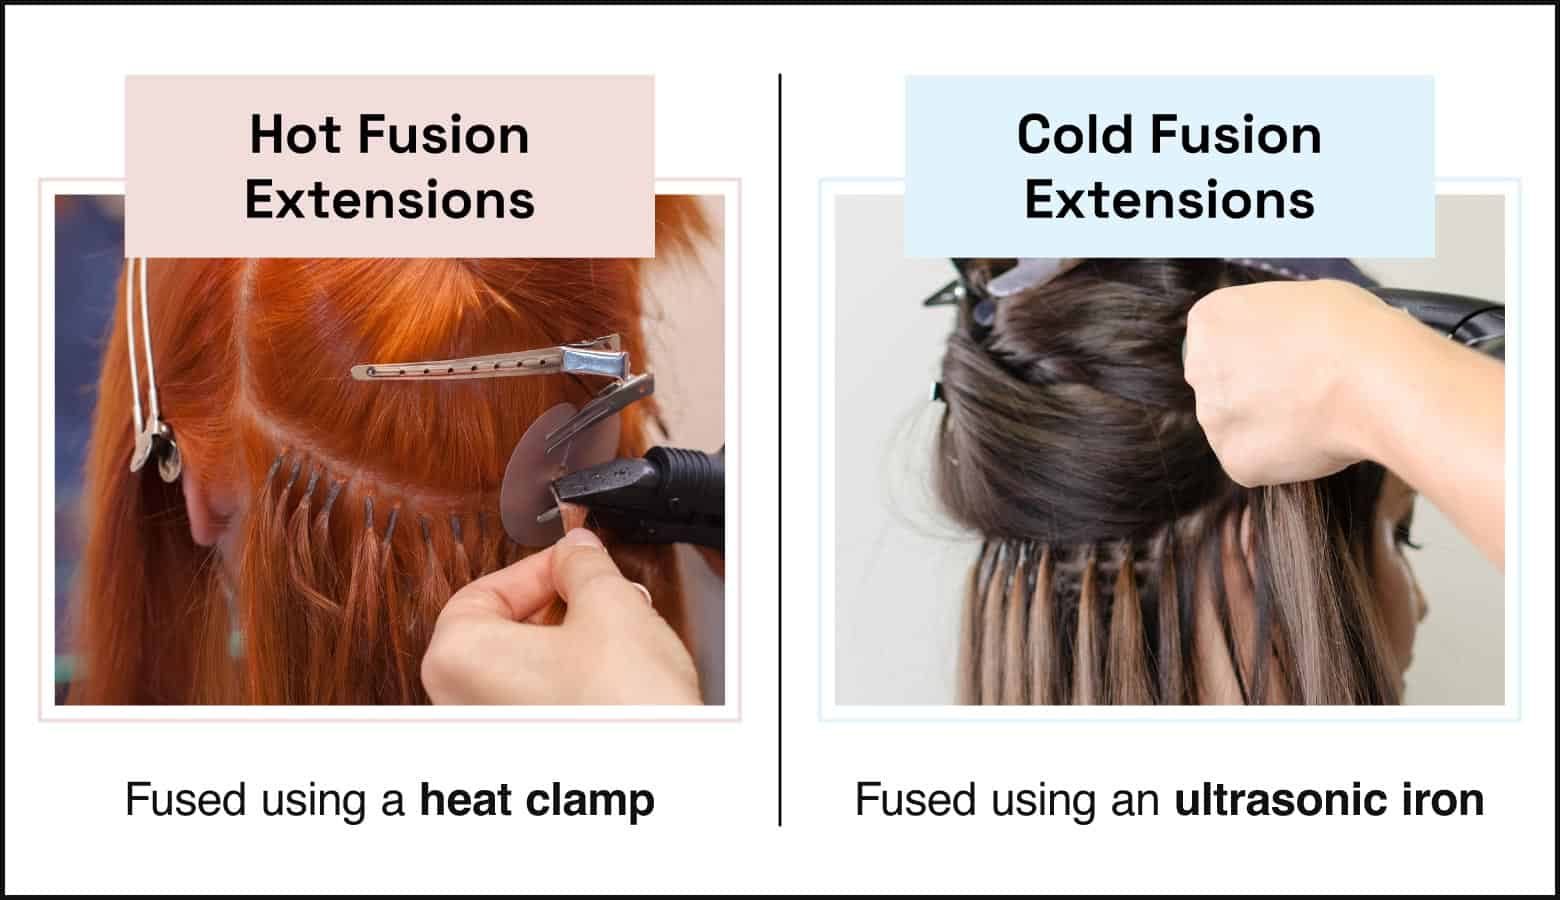 side-by-side images visualizing how hot fusion extensions use a heat clamp while cold fusion uses an ultrasonic iron